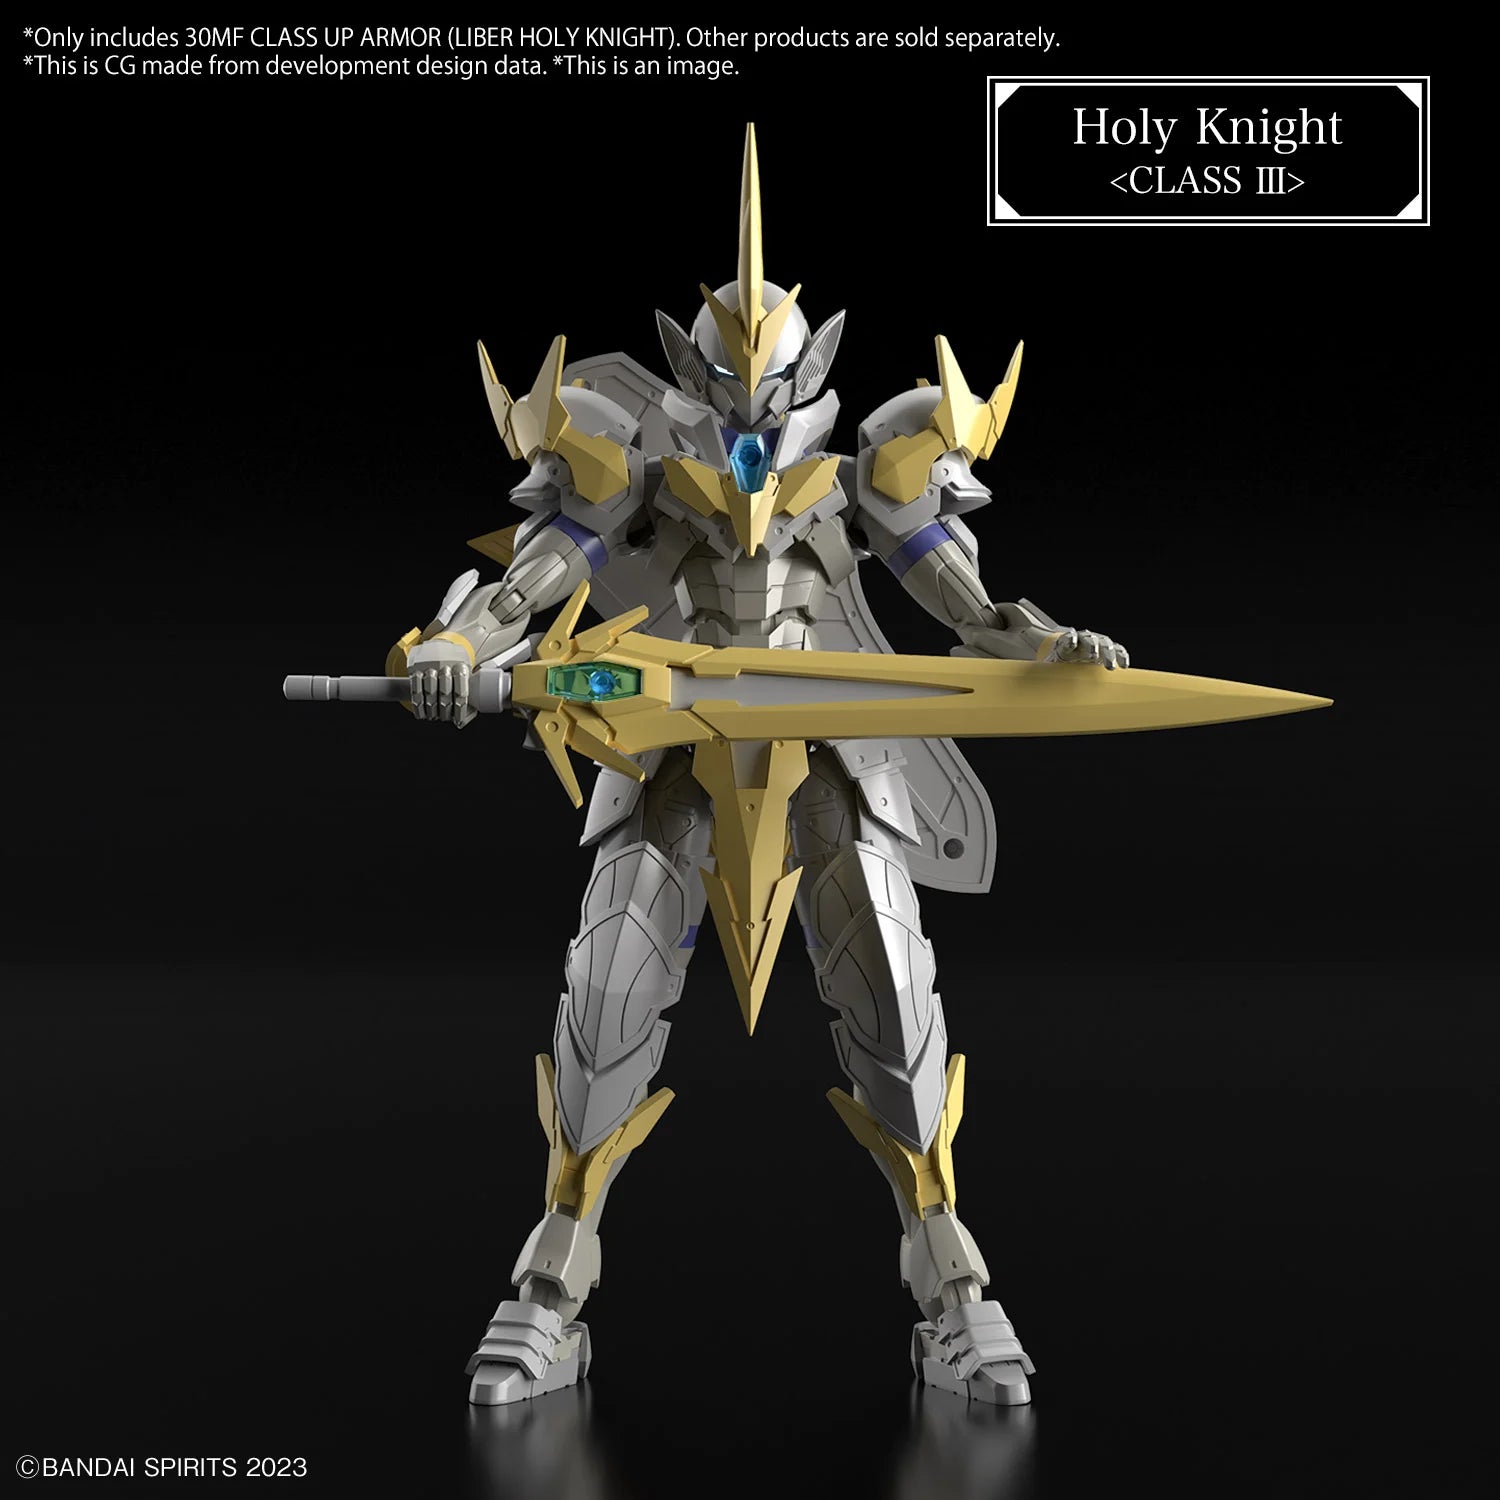 30MF - Class Up Armor - Liber Holy Knight